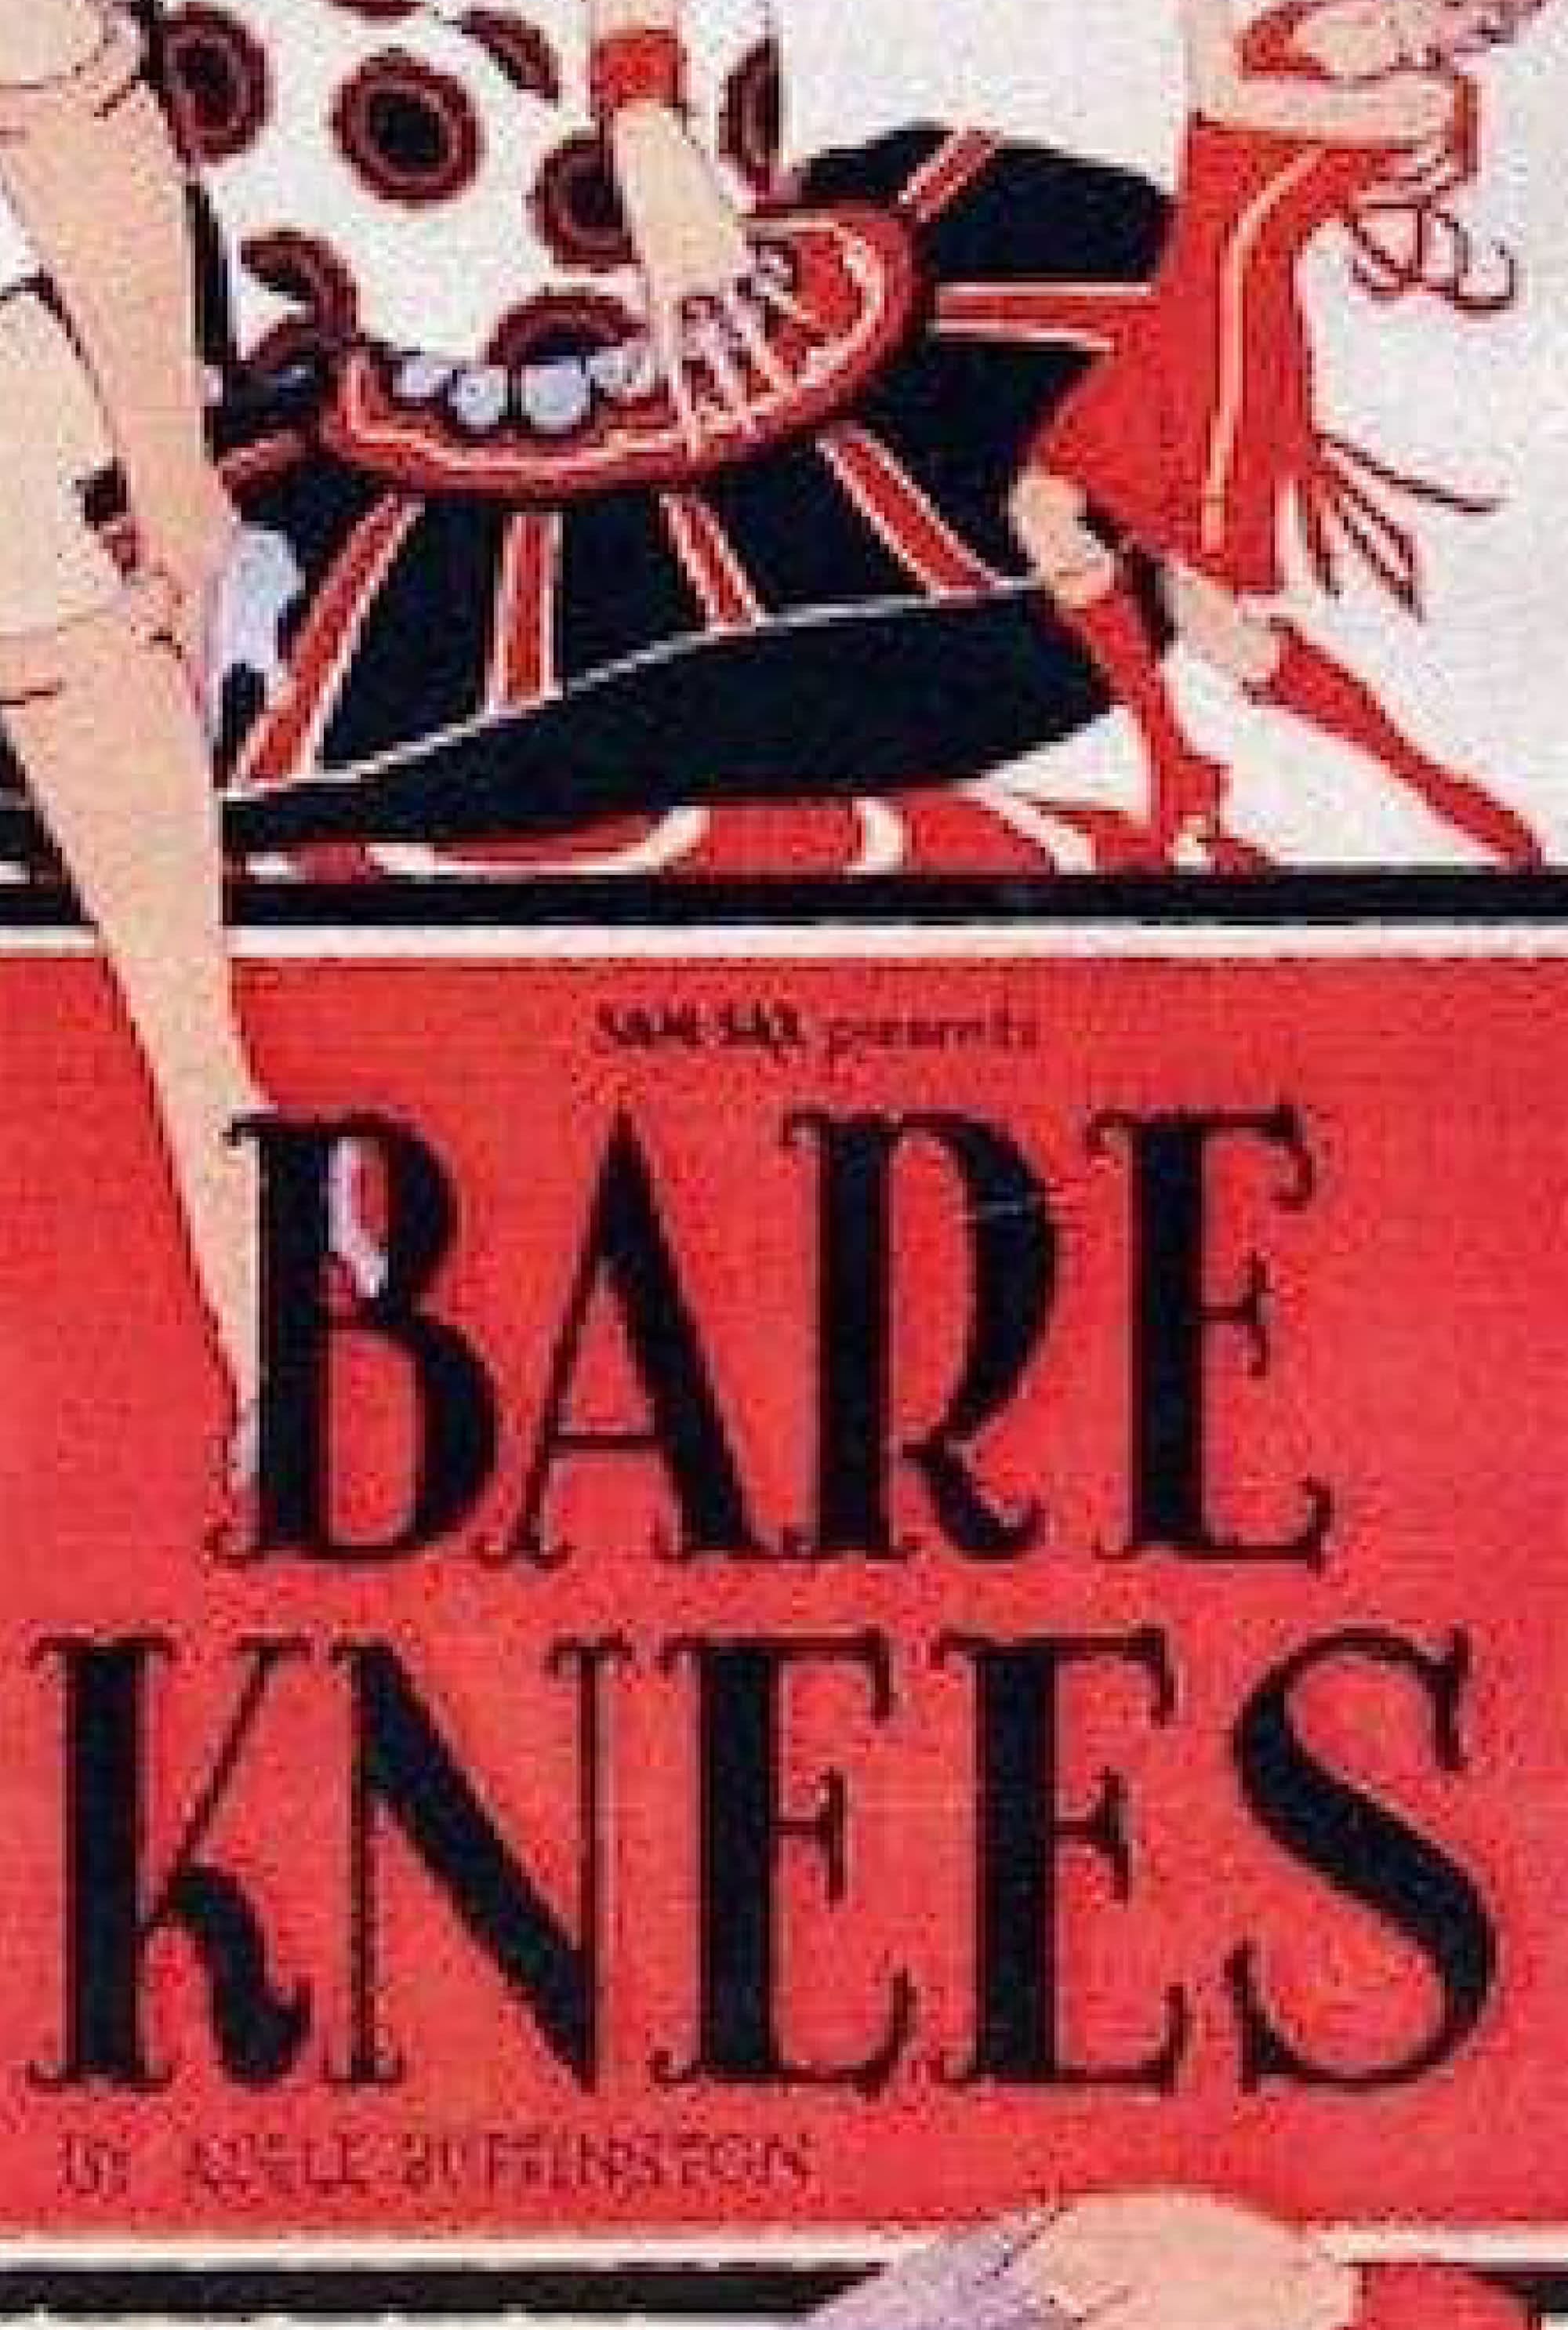 Atlas Presents: Sounds of Silence Film Series: Bare Knees - 1928 show poster